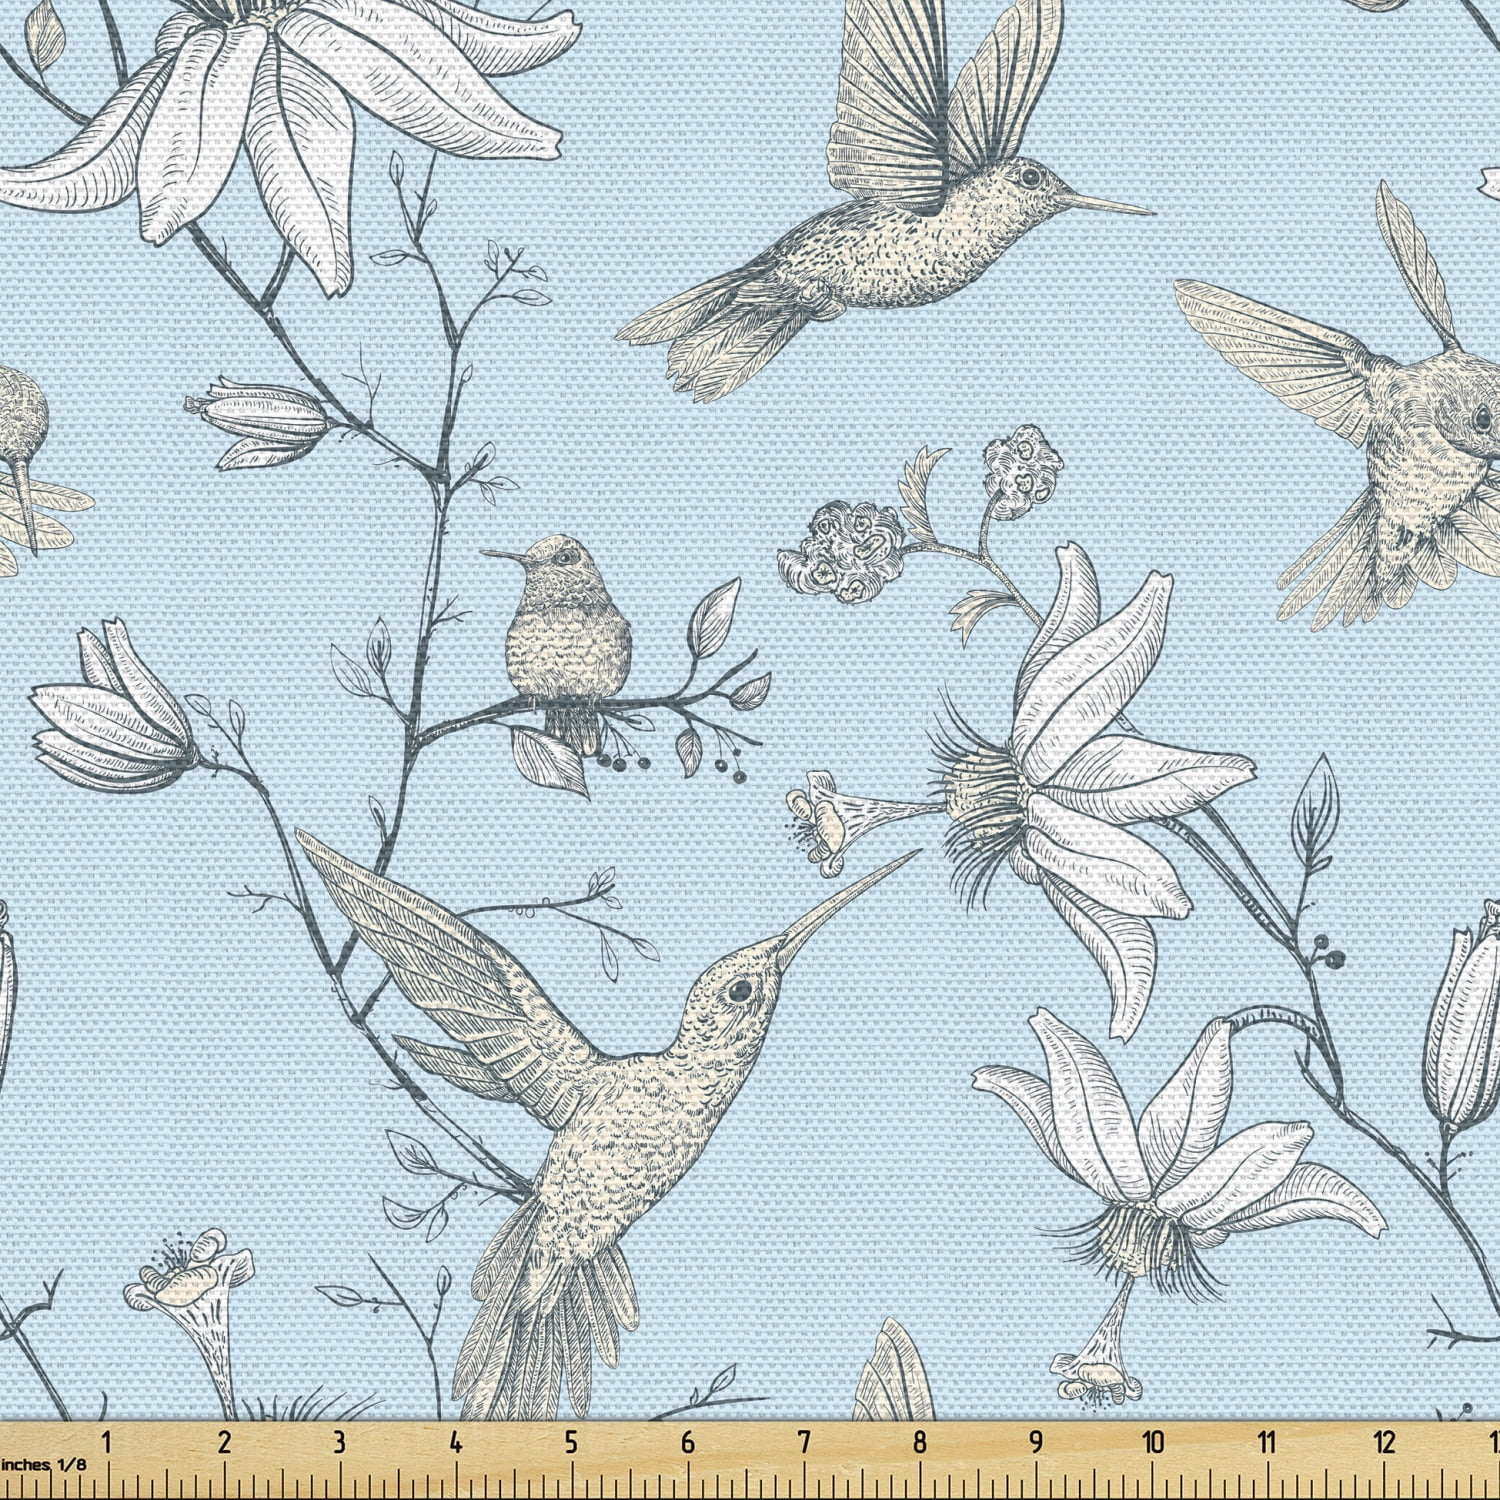 Orange Teal Drapery Upholstery Fabric Whimiscal Cotton Print Birds & Leaves 